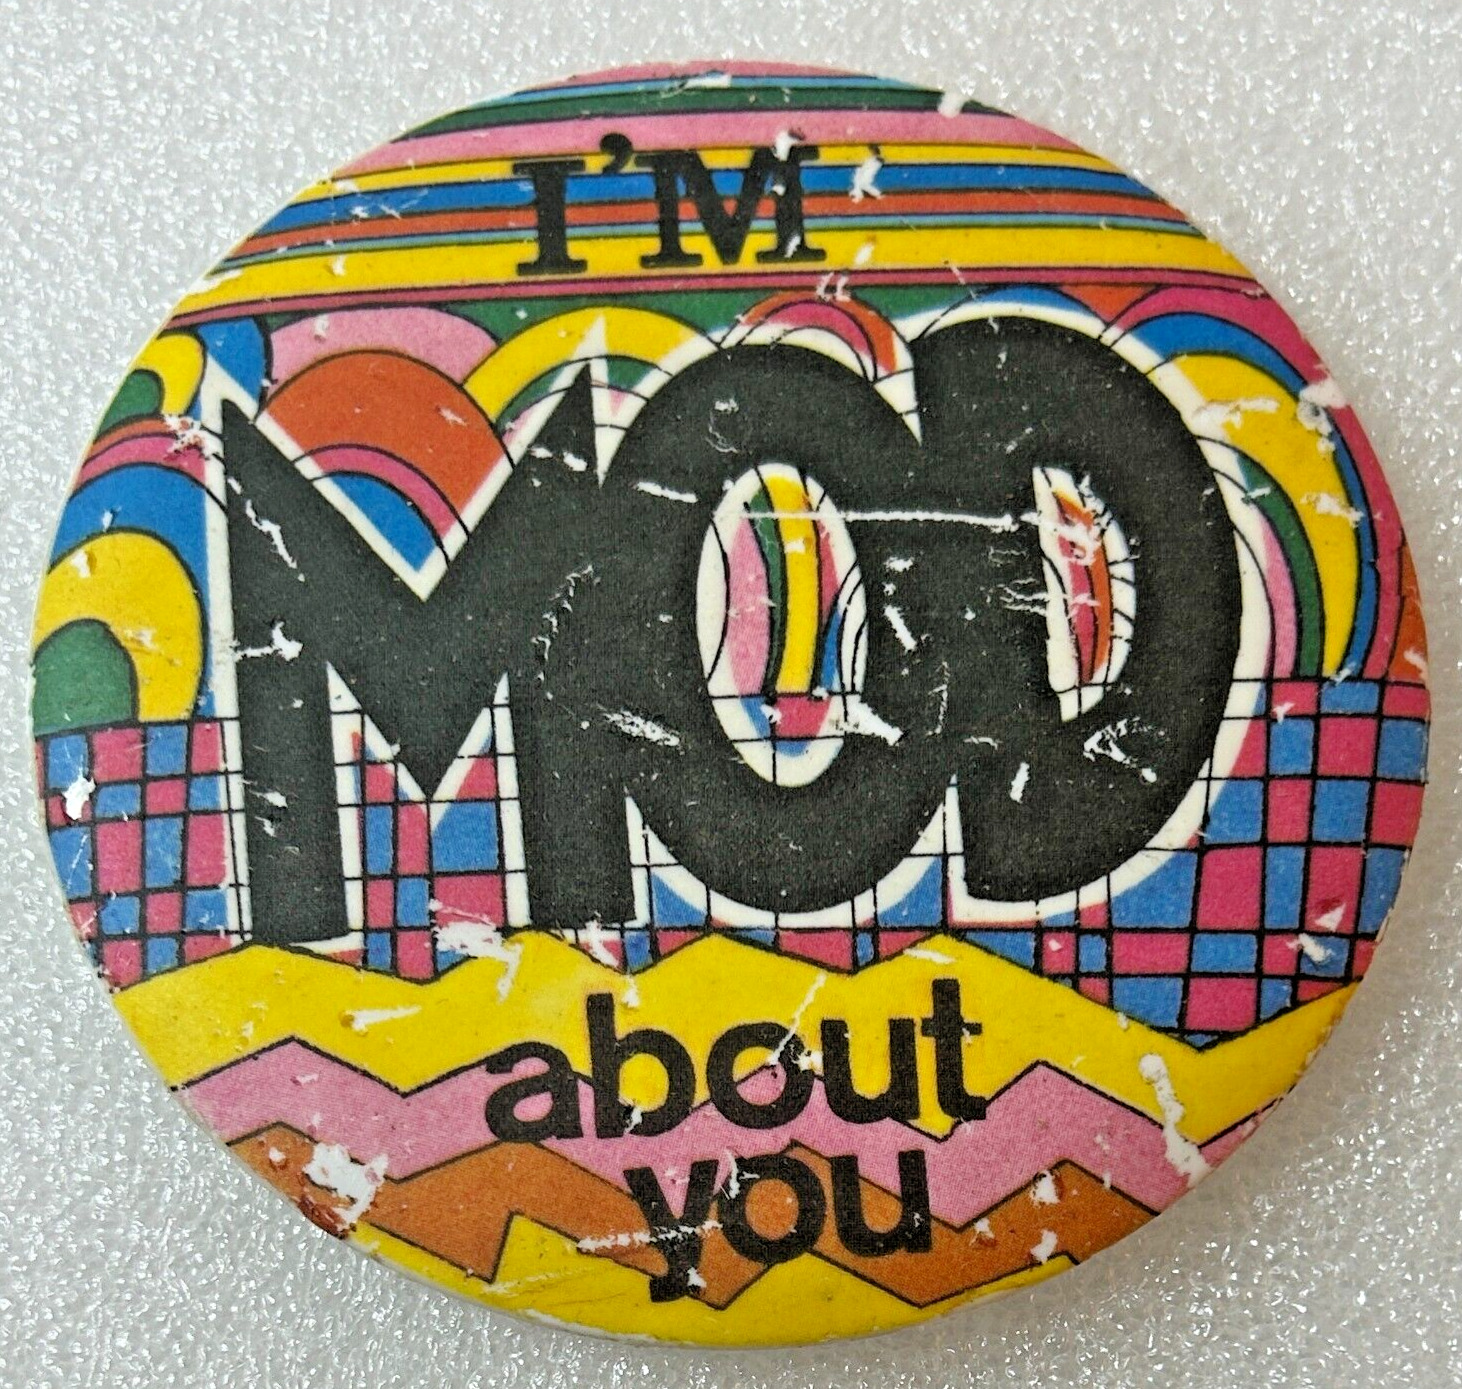 Vintage 1968 I'm Mod About You HASBRO Hippie Psychedelic Button Pin Pinback